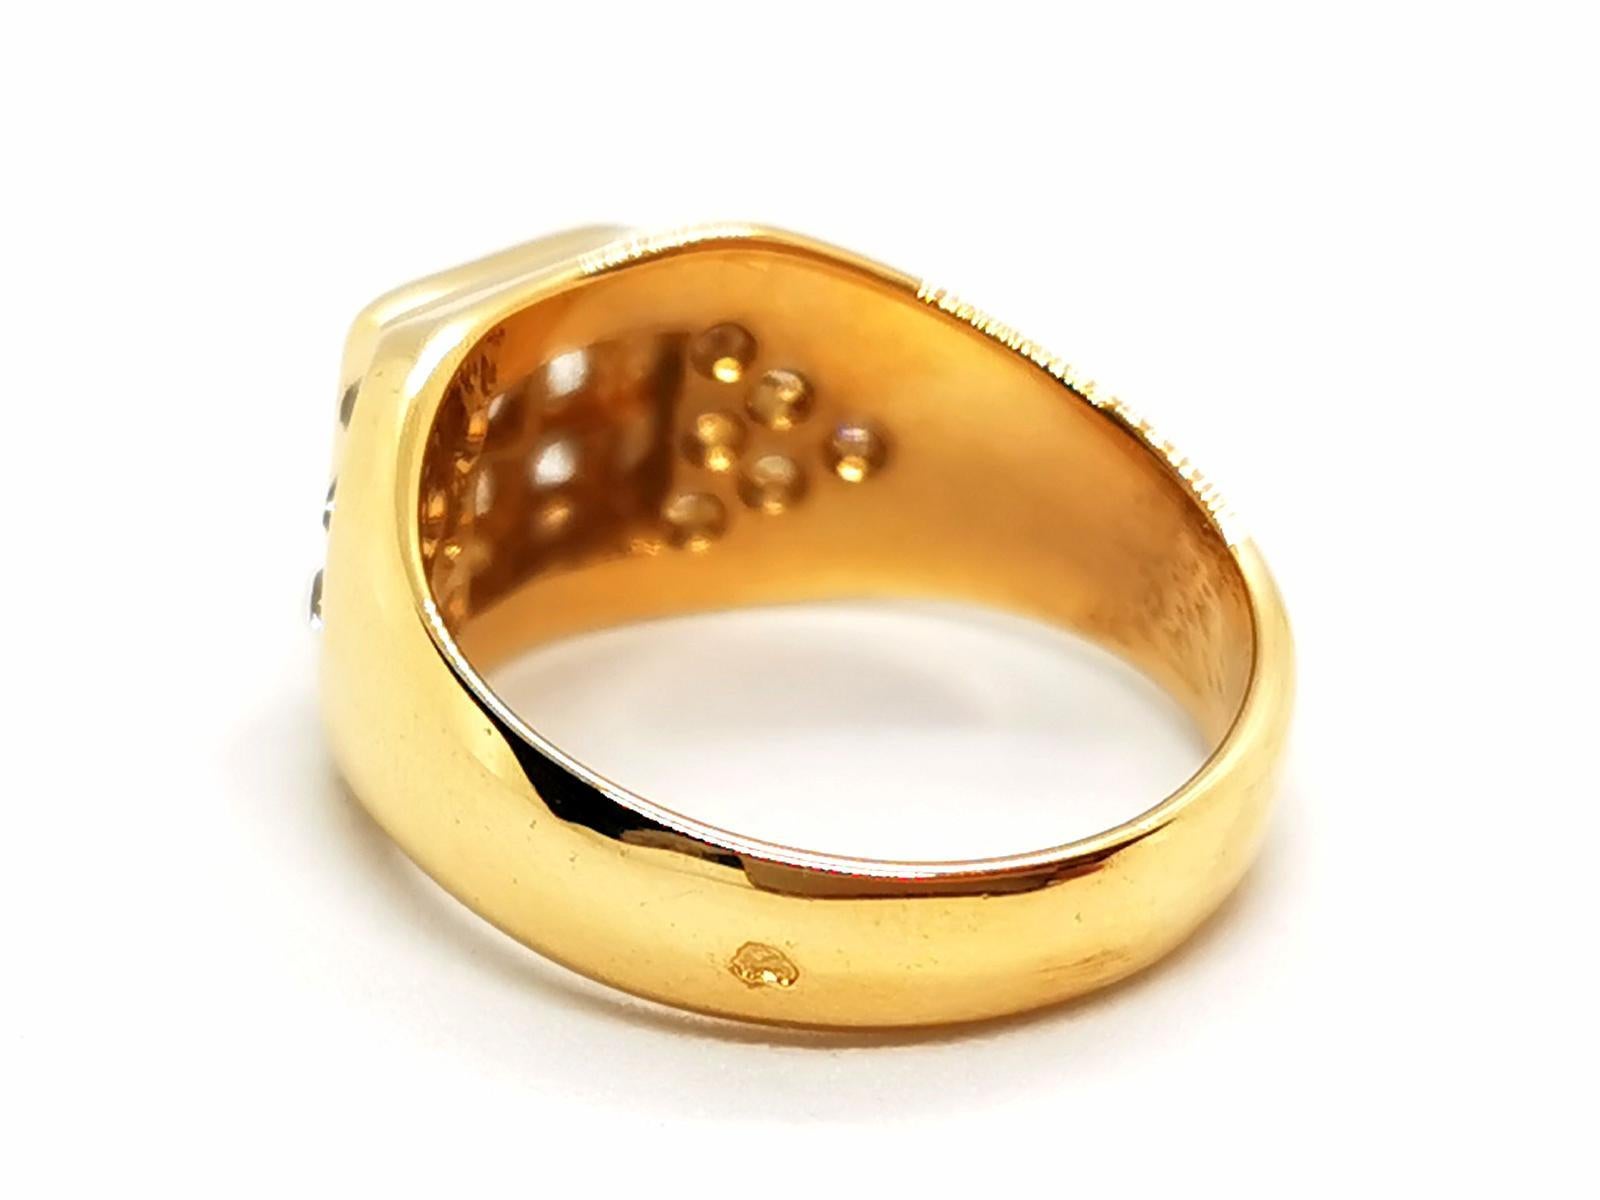 Old European Cut Ring Yellow Gold Diamond For Sale